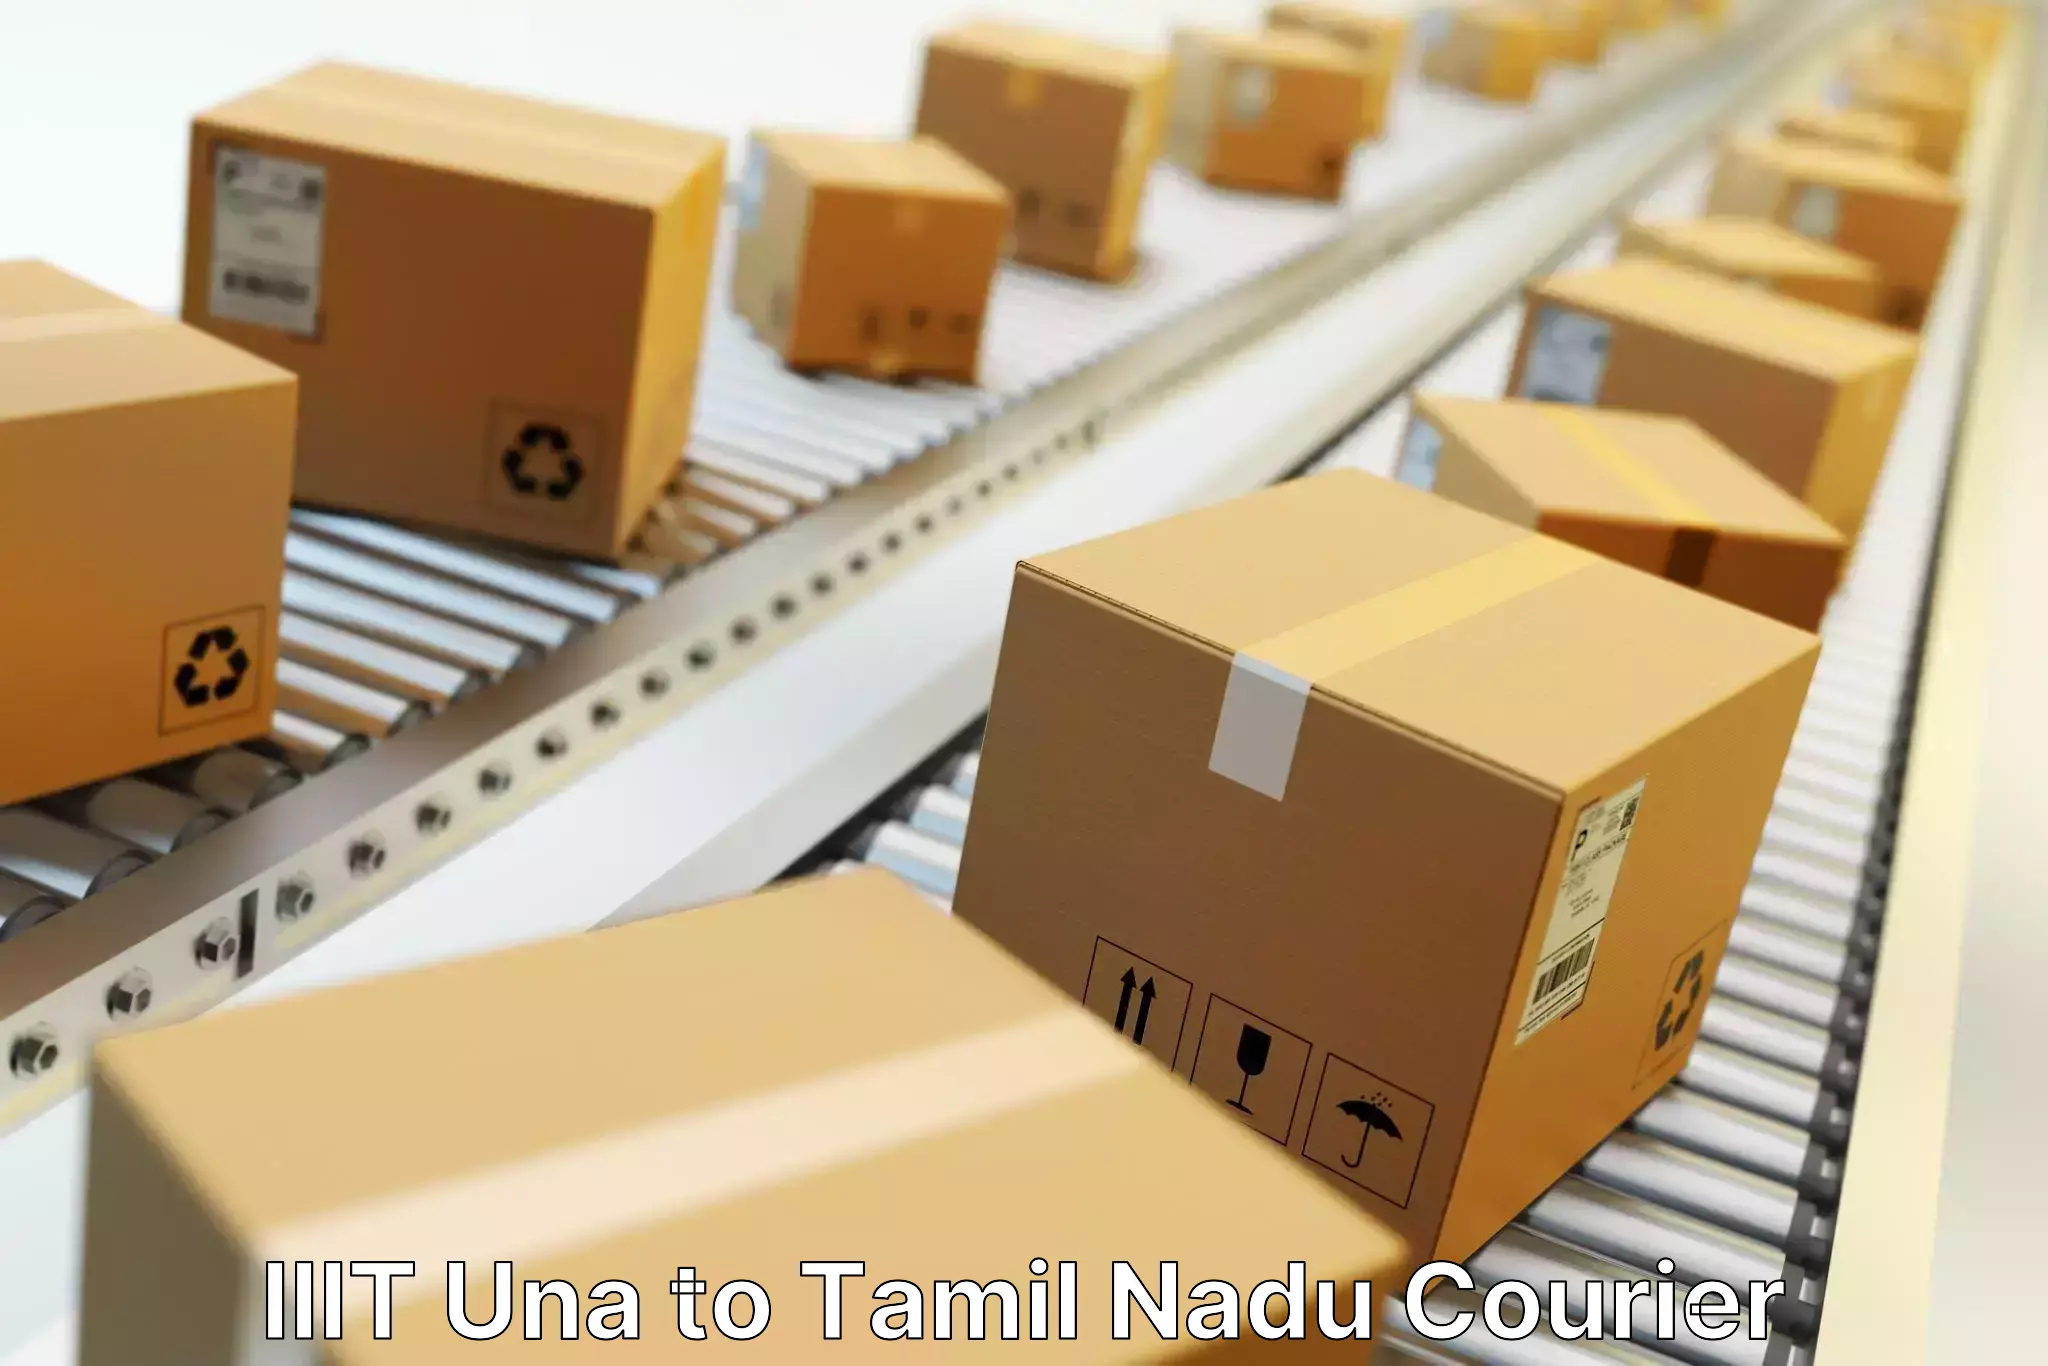 Same-day delivery solutions IIIT Una to Jayankondam